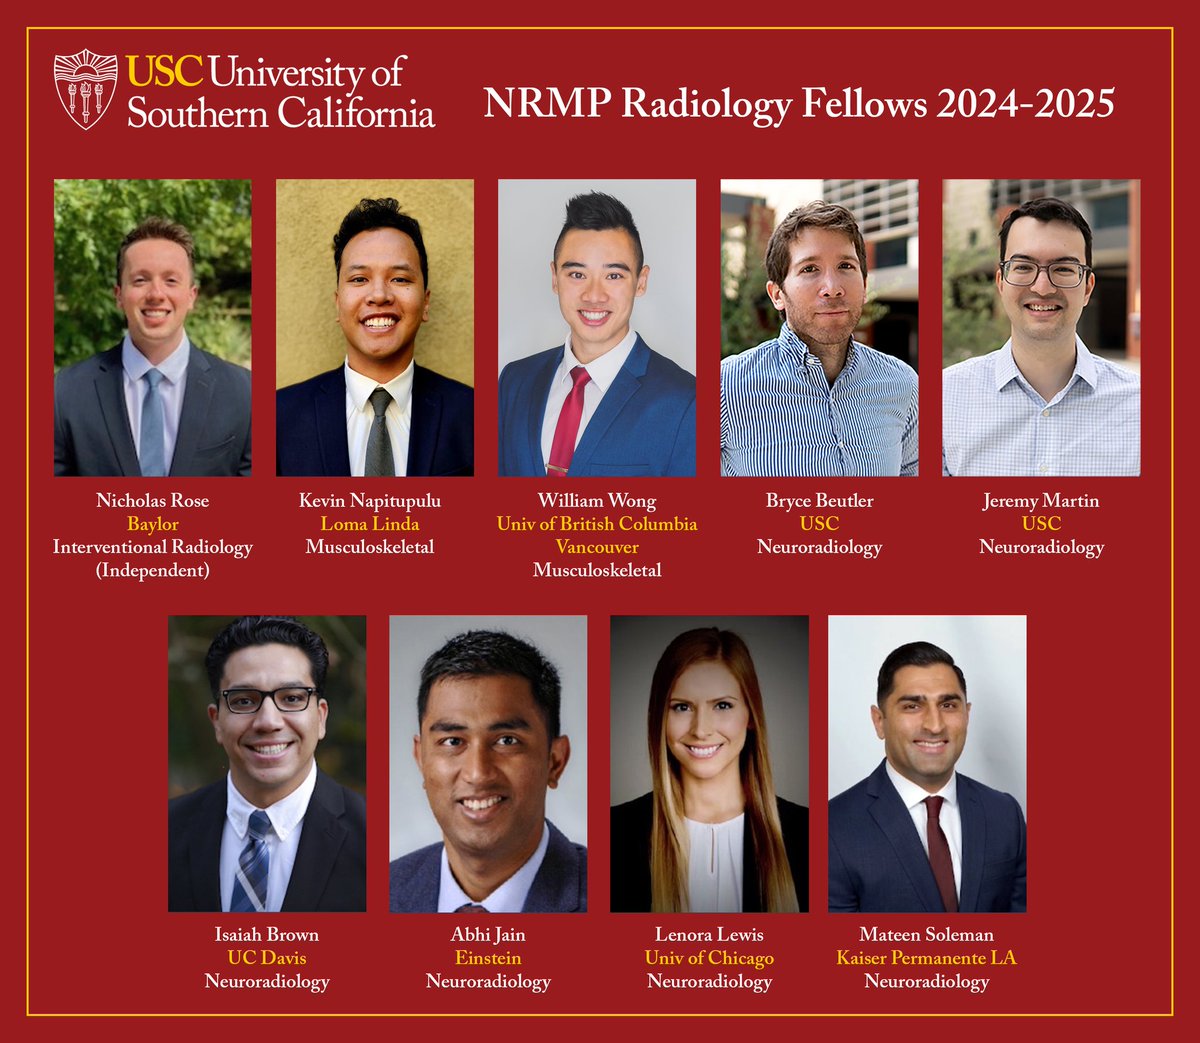 Hurray! We are seeing stars here! 🤩 Couldn't be happier to have matched with this talented bunch! Welcome to the #TrojanFamily, cannot wait for you to join us! ✌️♥️

#FellowshipMatch #Radiology #MedEd  #Match #FightOn @TheNRMP